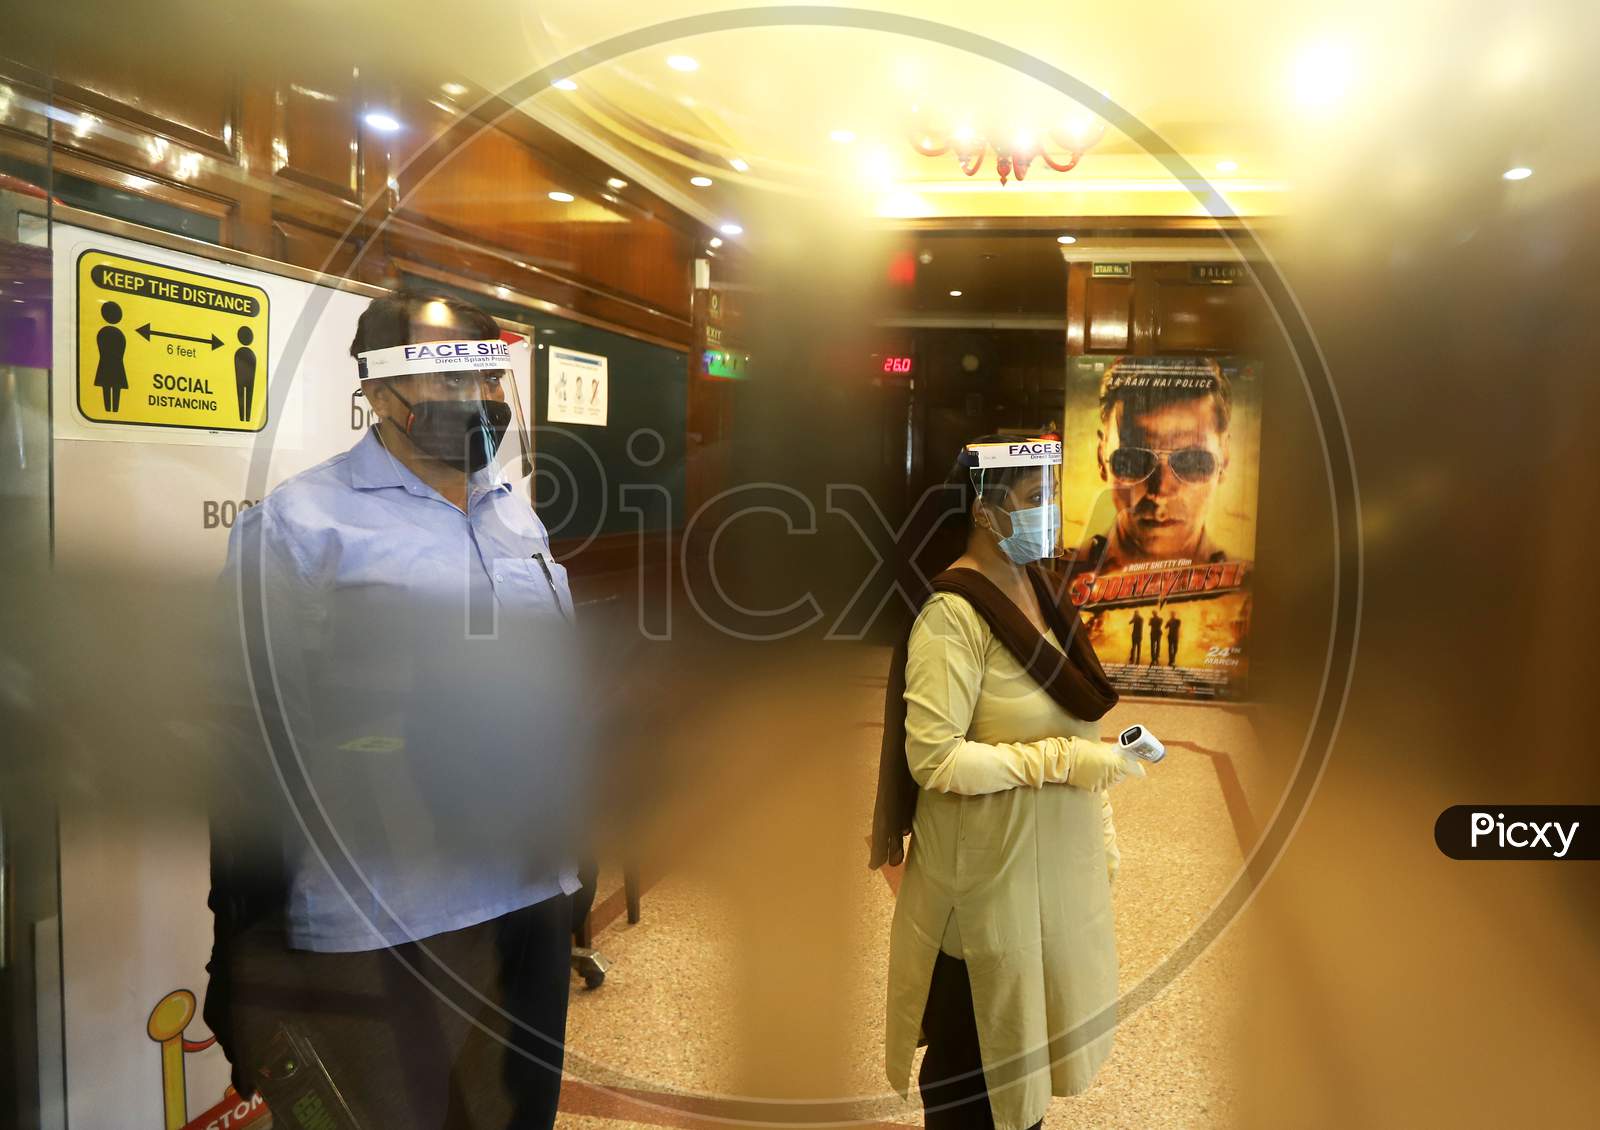 Workers wear facemasks and face shields  inside a theatre during a sanitisation work ahead of the scheduled reopening of cinema theatres on October 15 as the Covid-19 coronavirus imposed lockdown eases further in New Delhi on October 13, 2020.